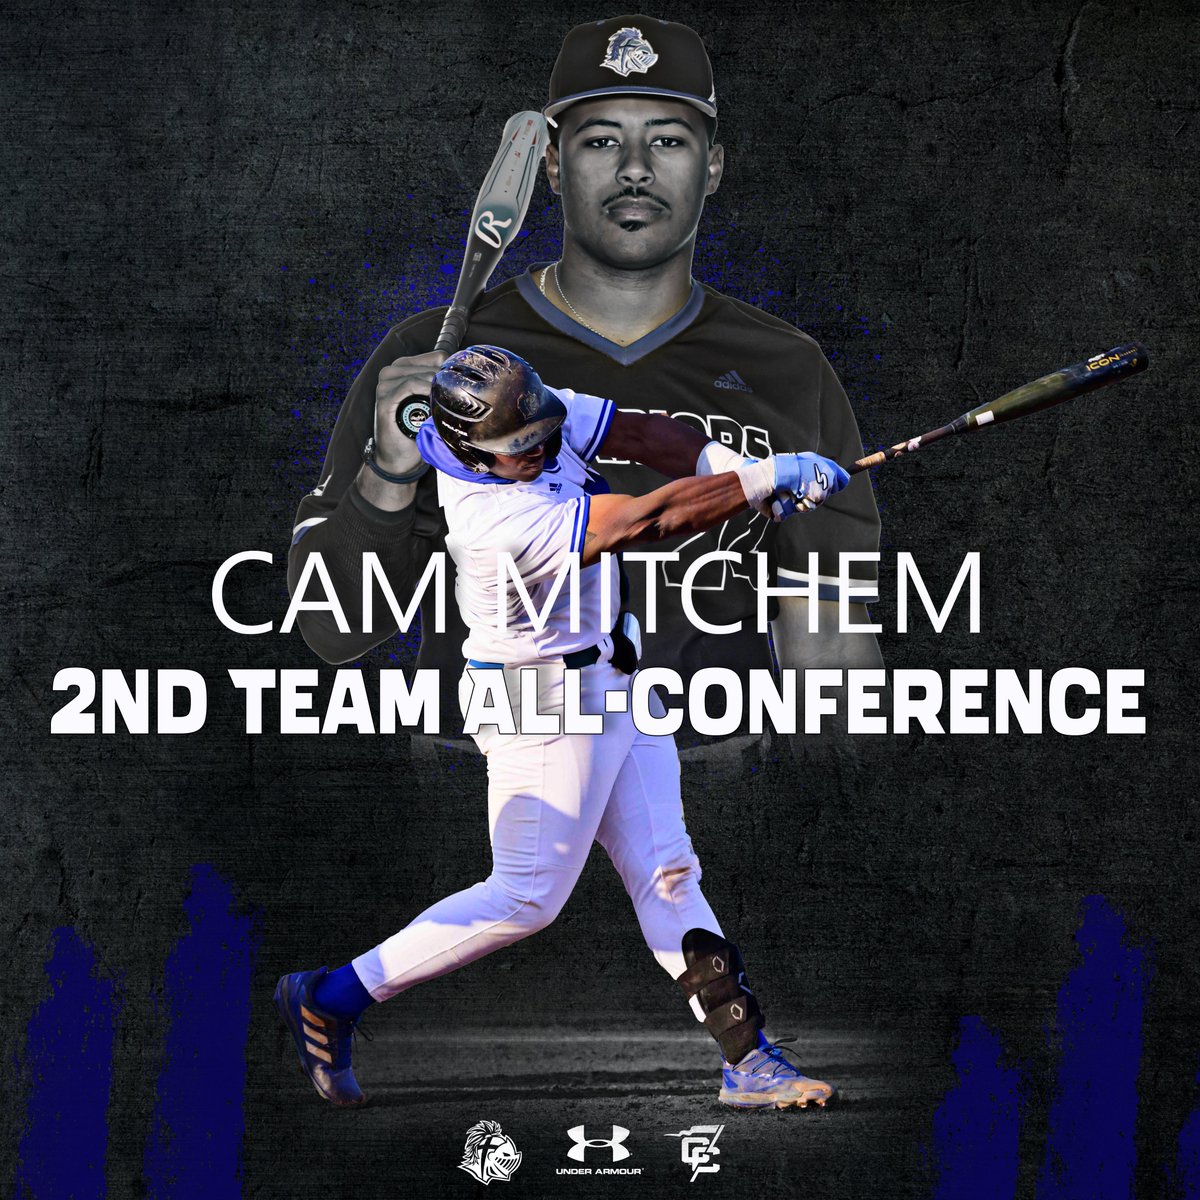 Congratulations to @SWUBaseball first baseman Cam Mitchem on his selection to the @ConfCarolinas All-Conference Second Team! Mitchem led the Warriors with 13 HRs and 13 doubles while also driving in 53 runs during his senior campaign #TeamSWU #ncaad2 #conferencecarolinas